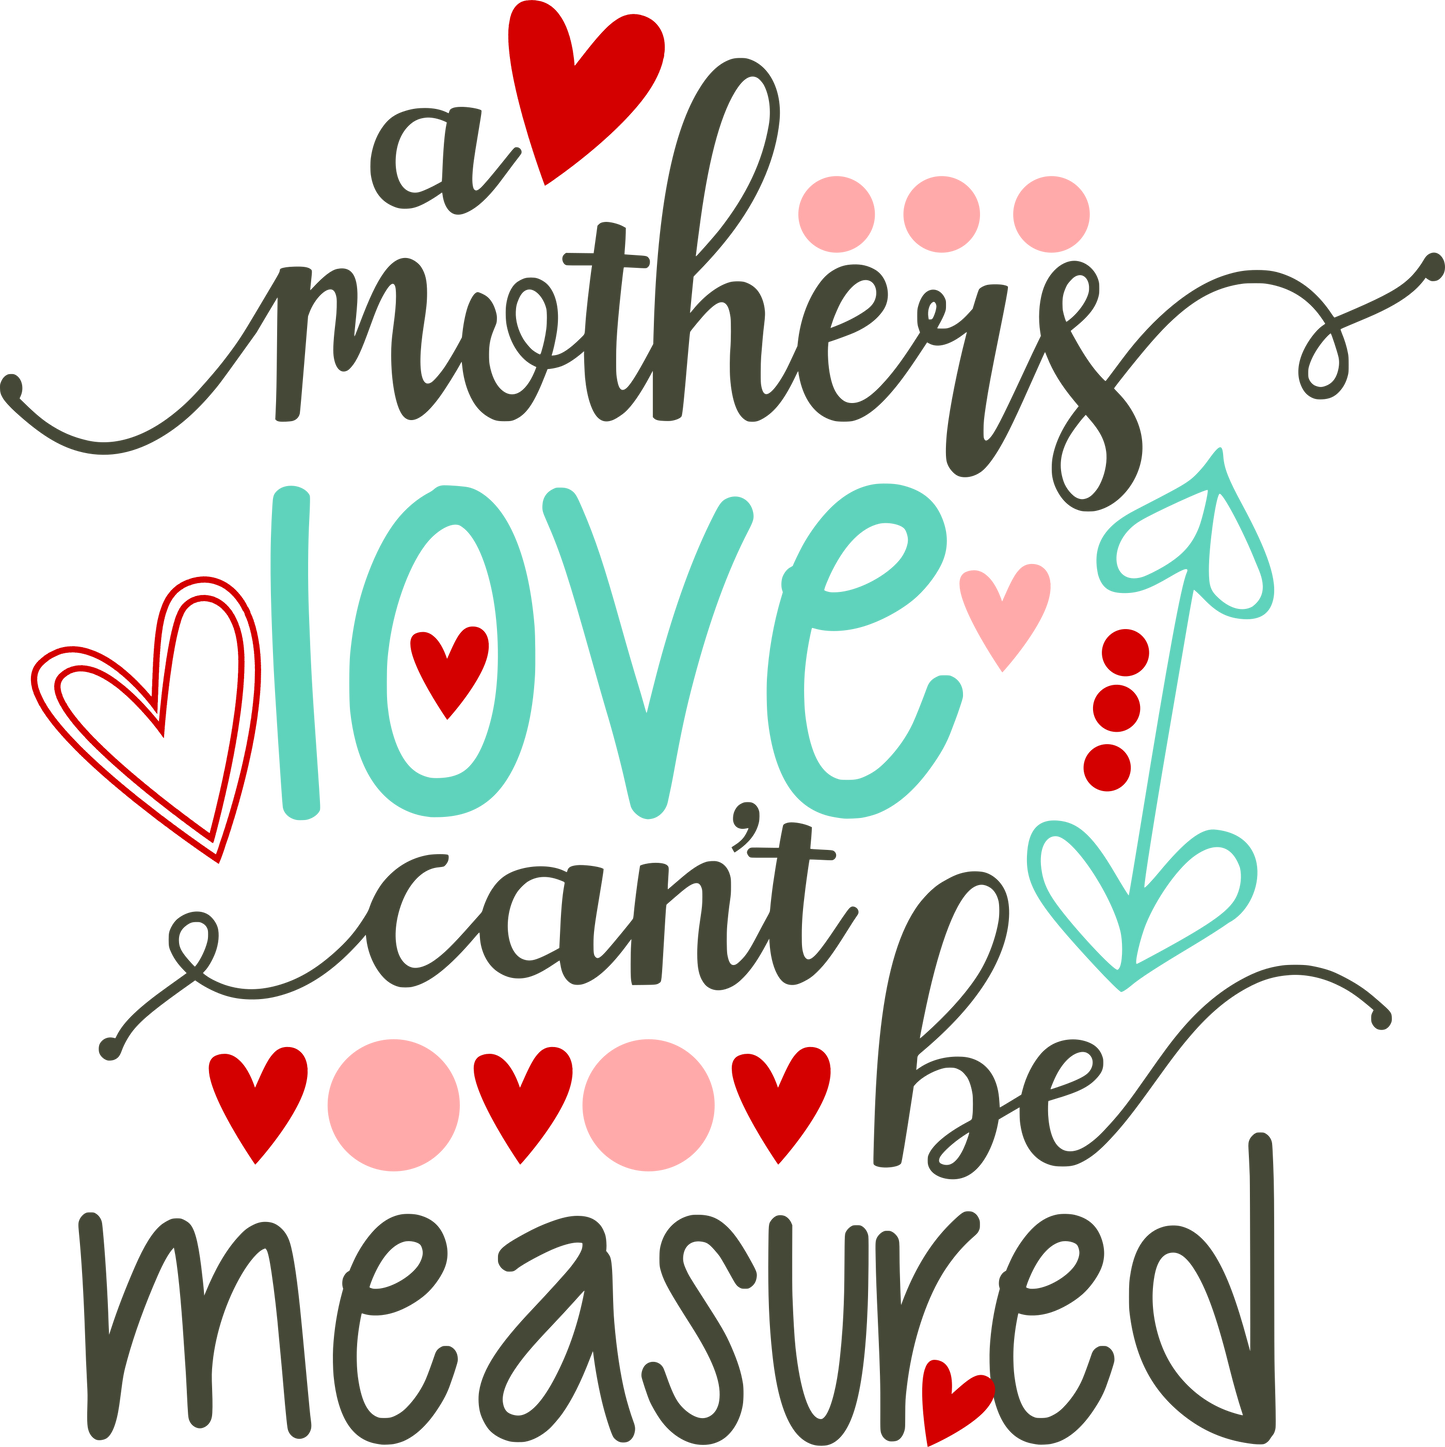 Vinyl Decal | A Mother’s Love | Cars, Laptops, Etc.